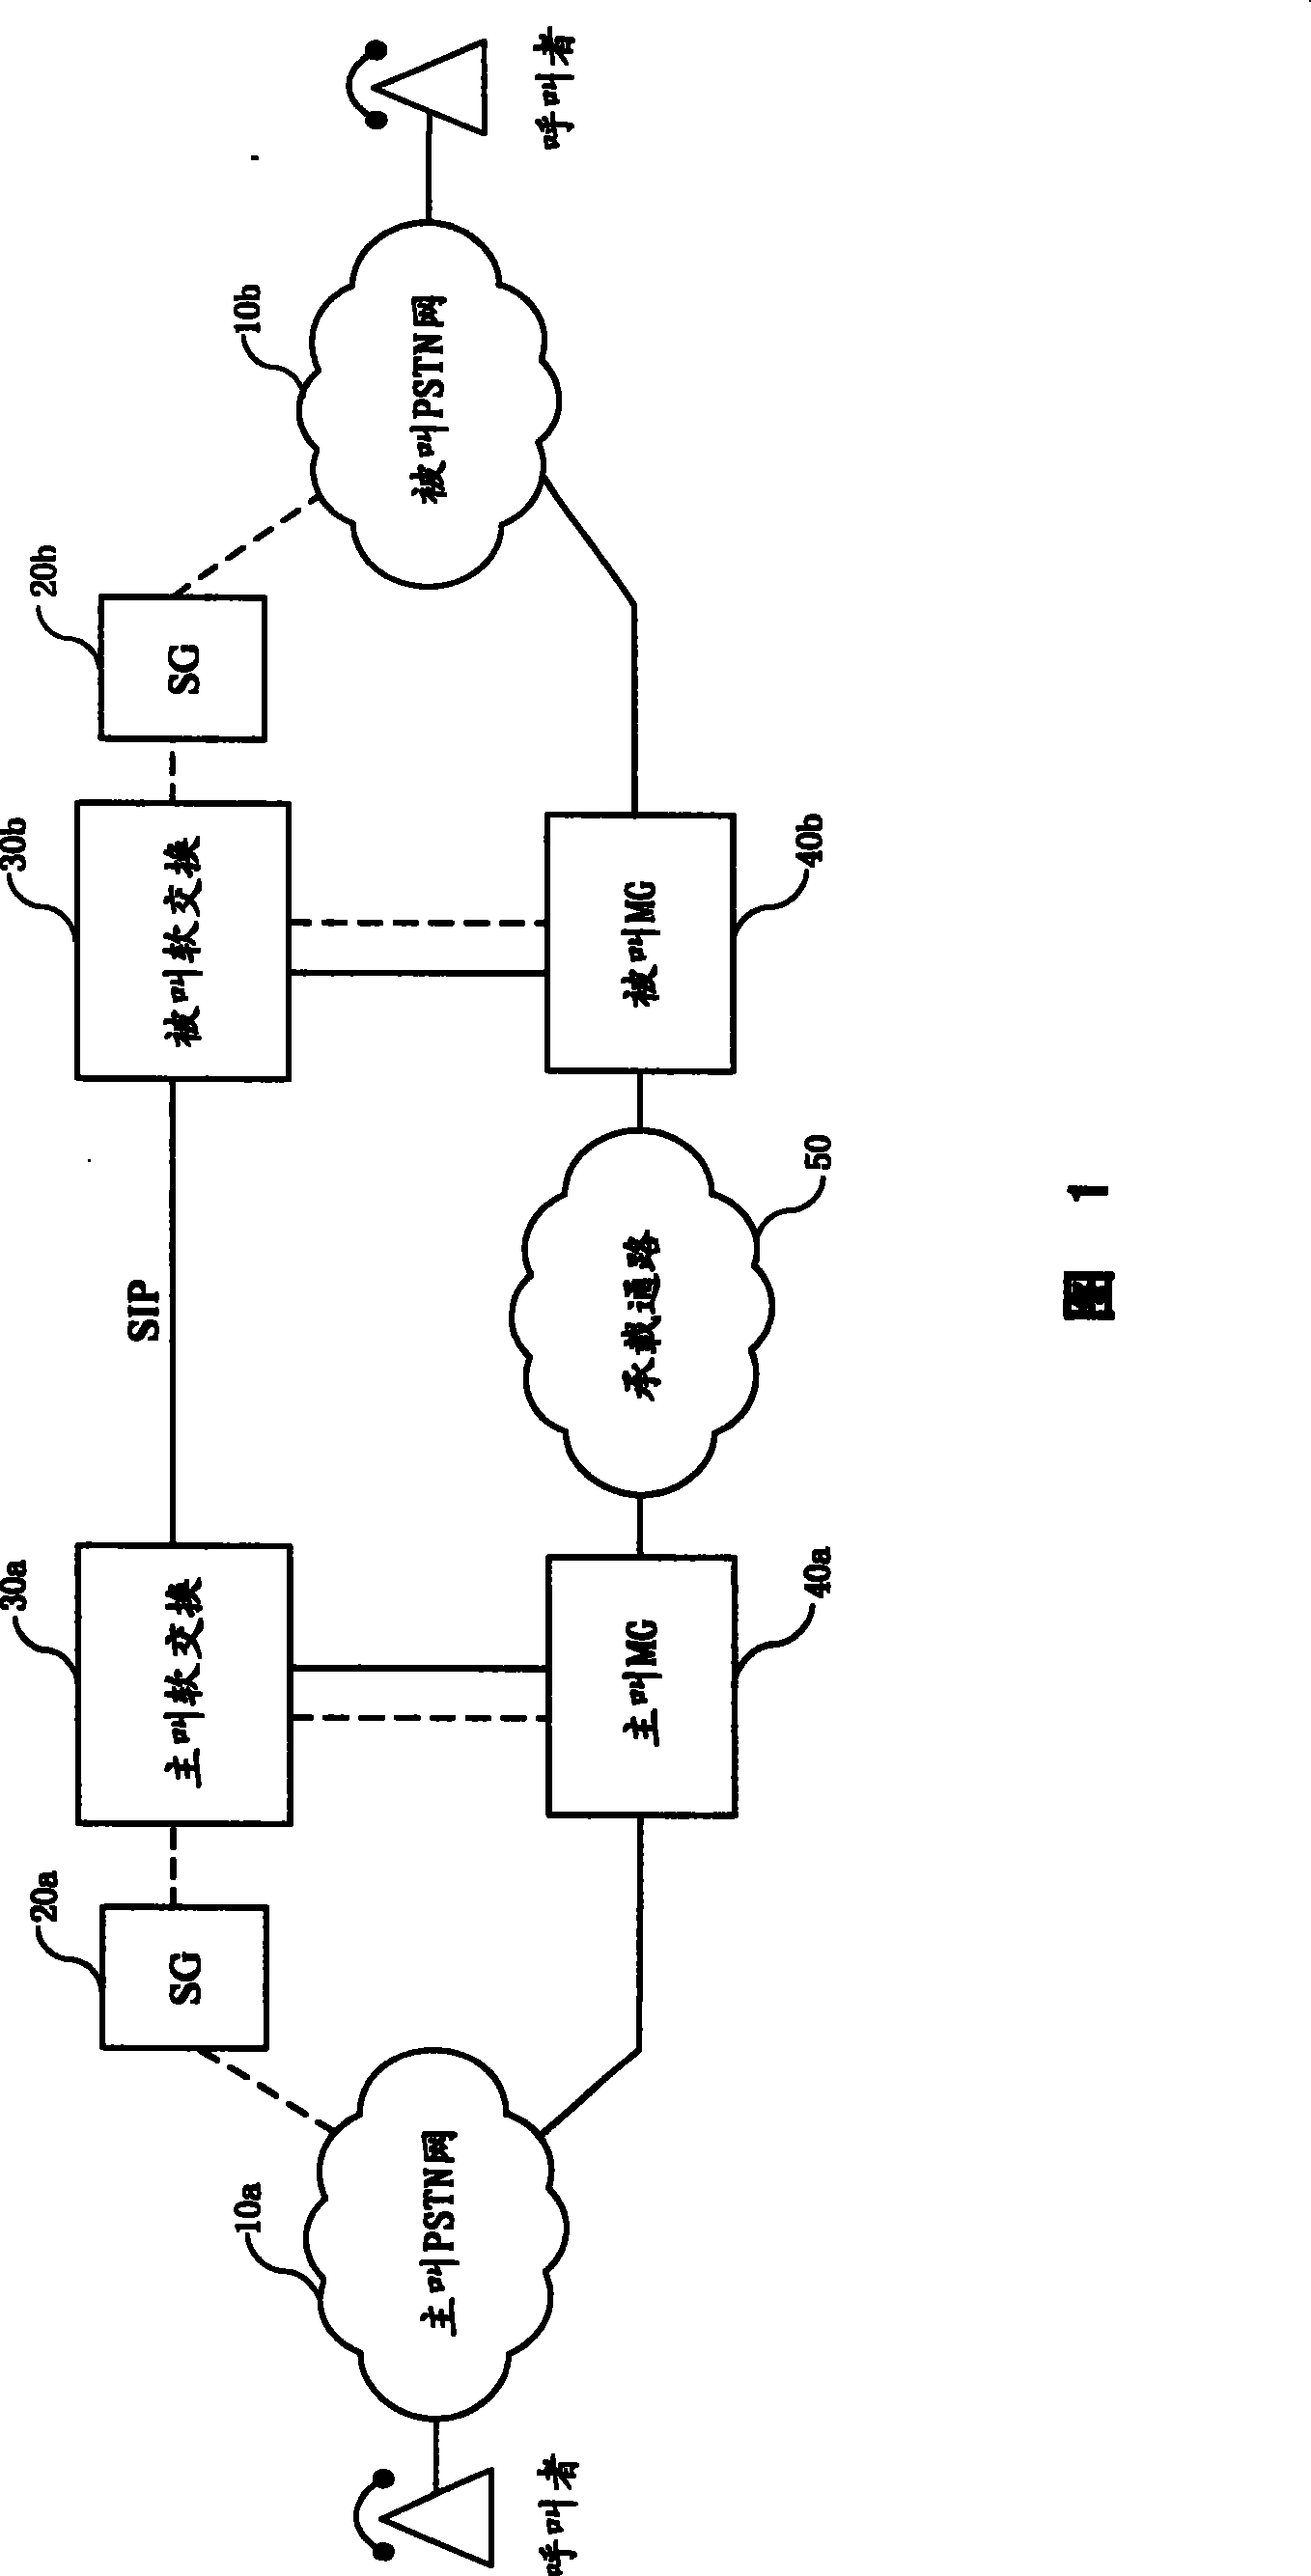 Method for overlapped transmitting number by session initial protocol